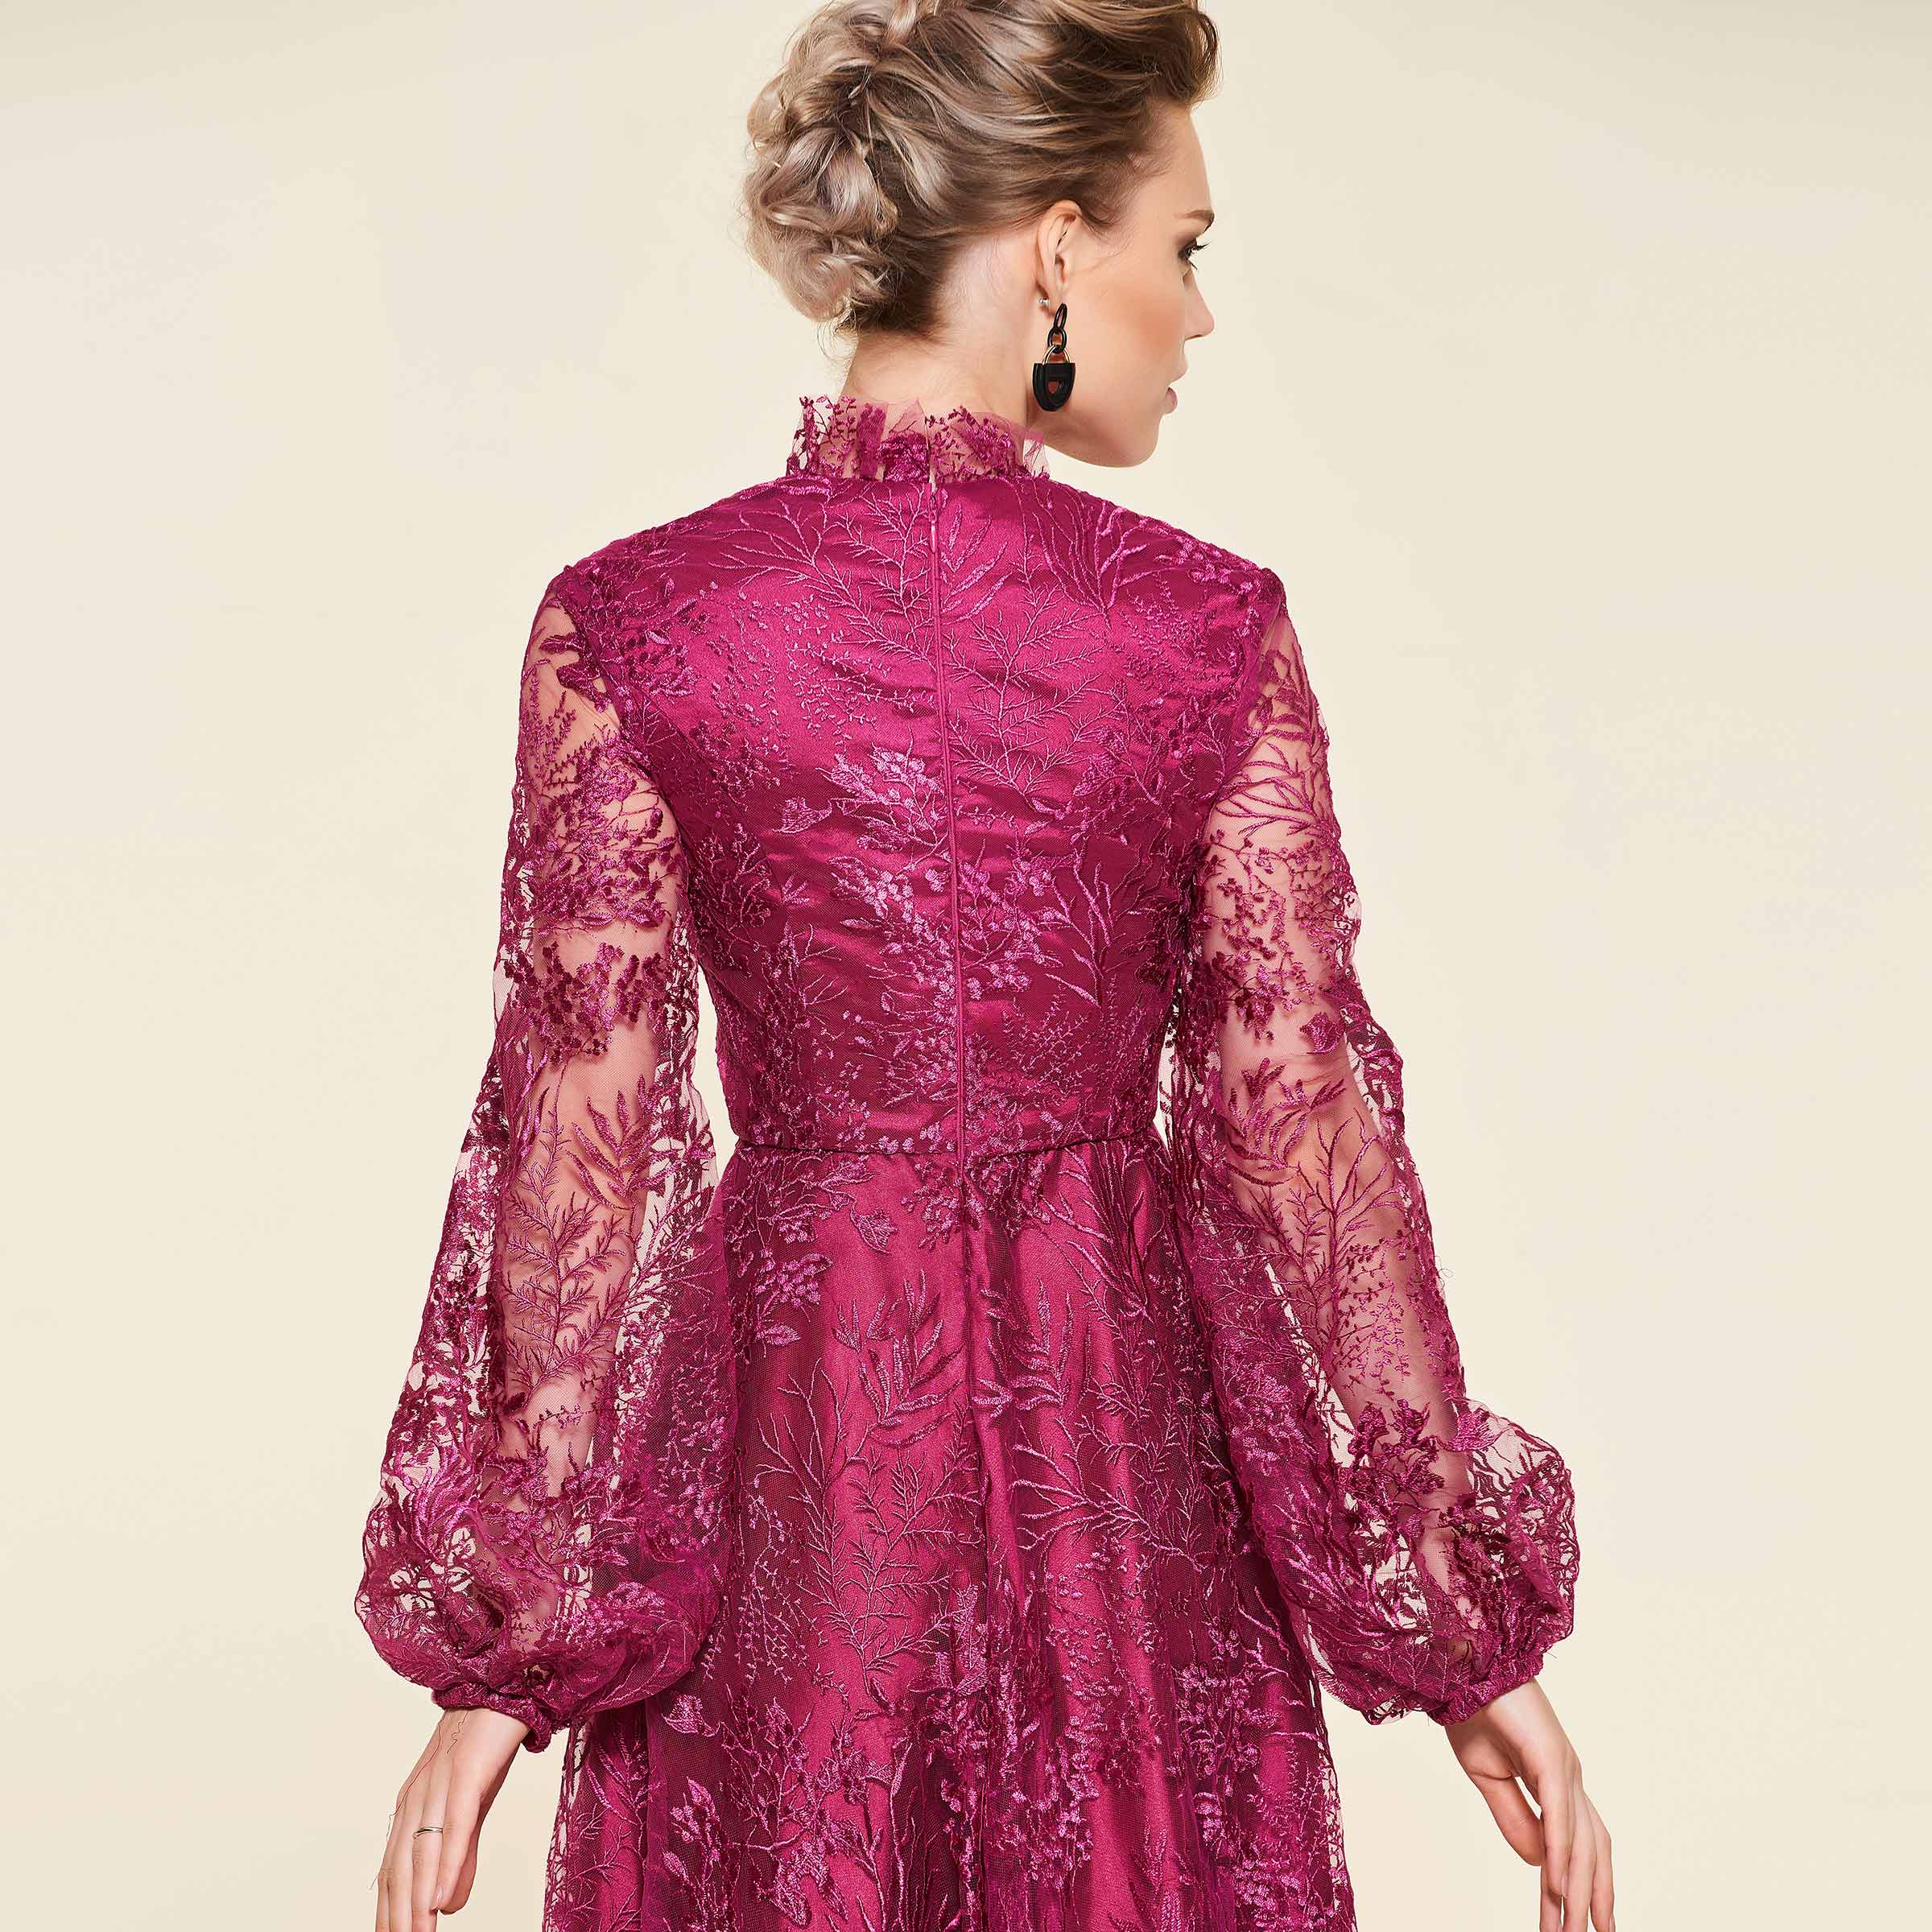 Empire Waist Lace Mother of the Bride Dress with Long Sleeves